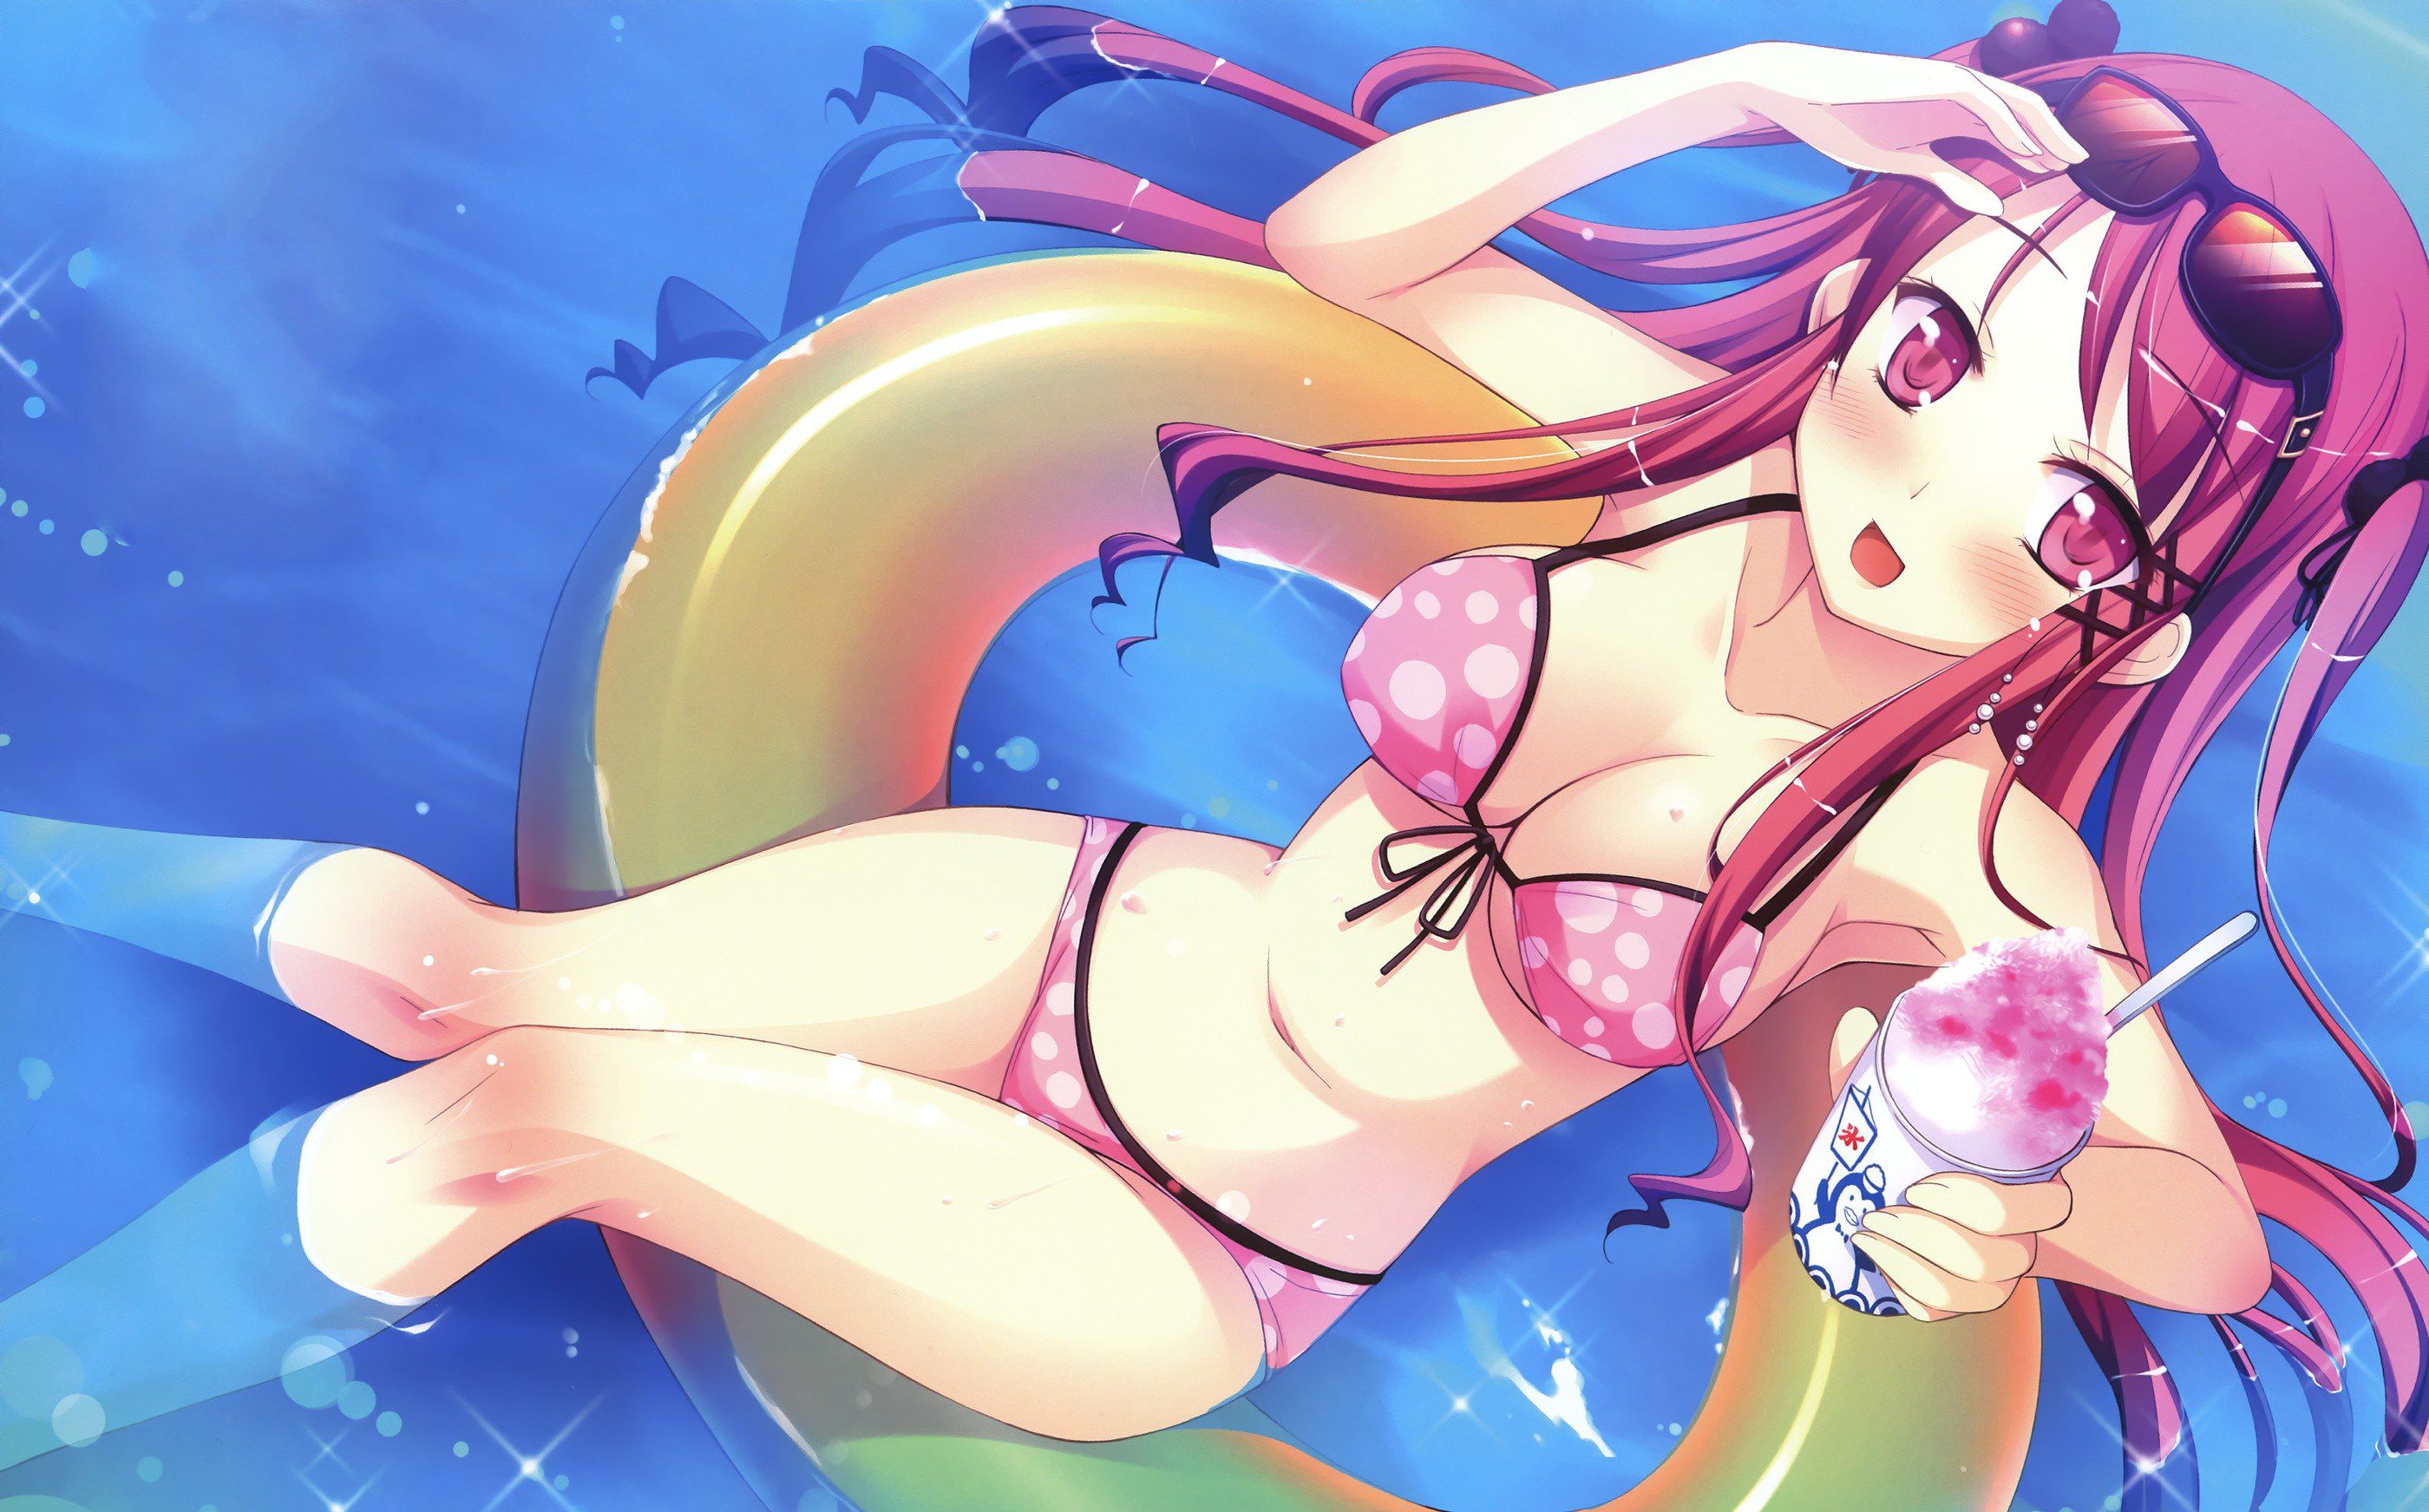 Will continue summer swimsuit pictures 19